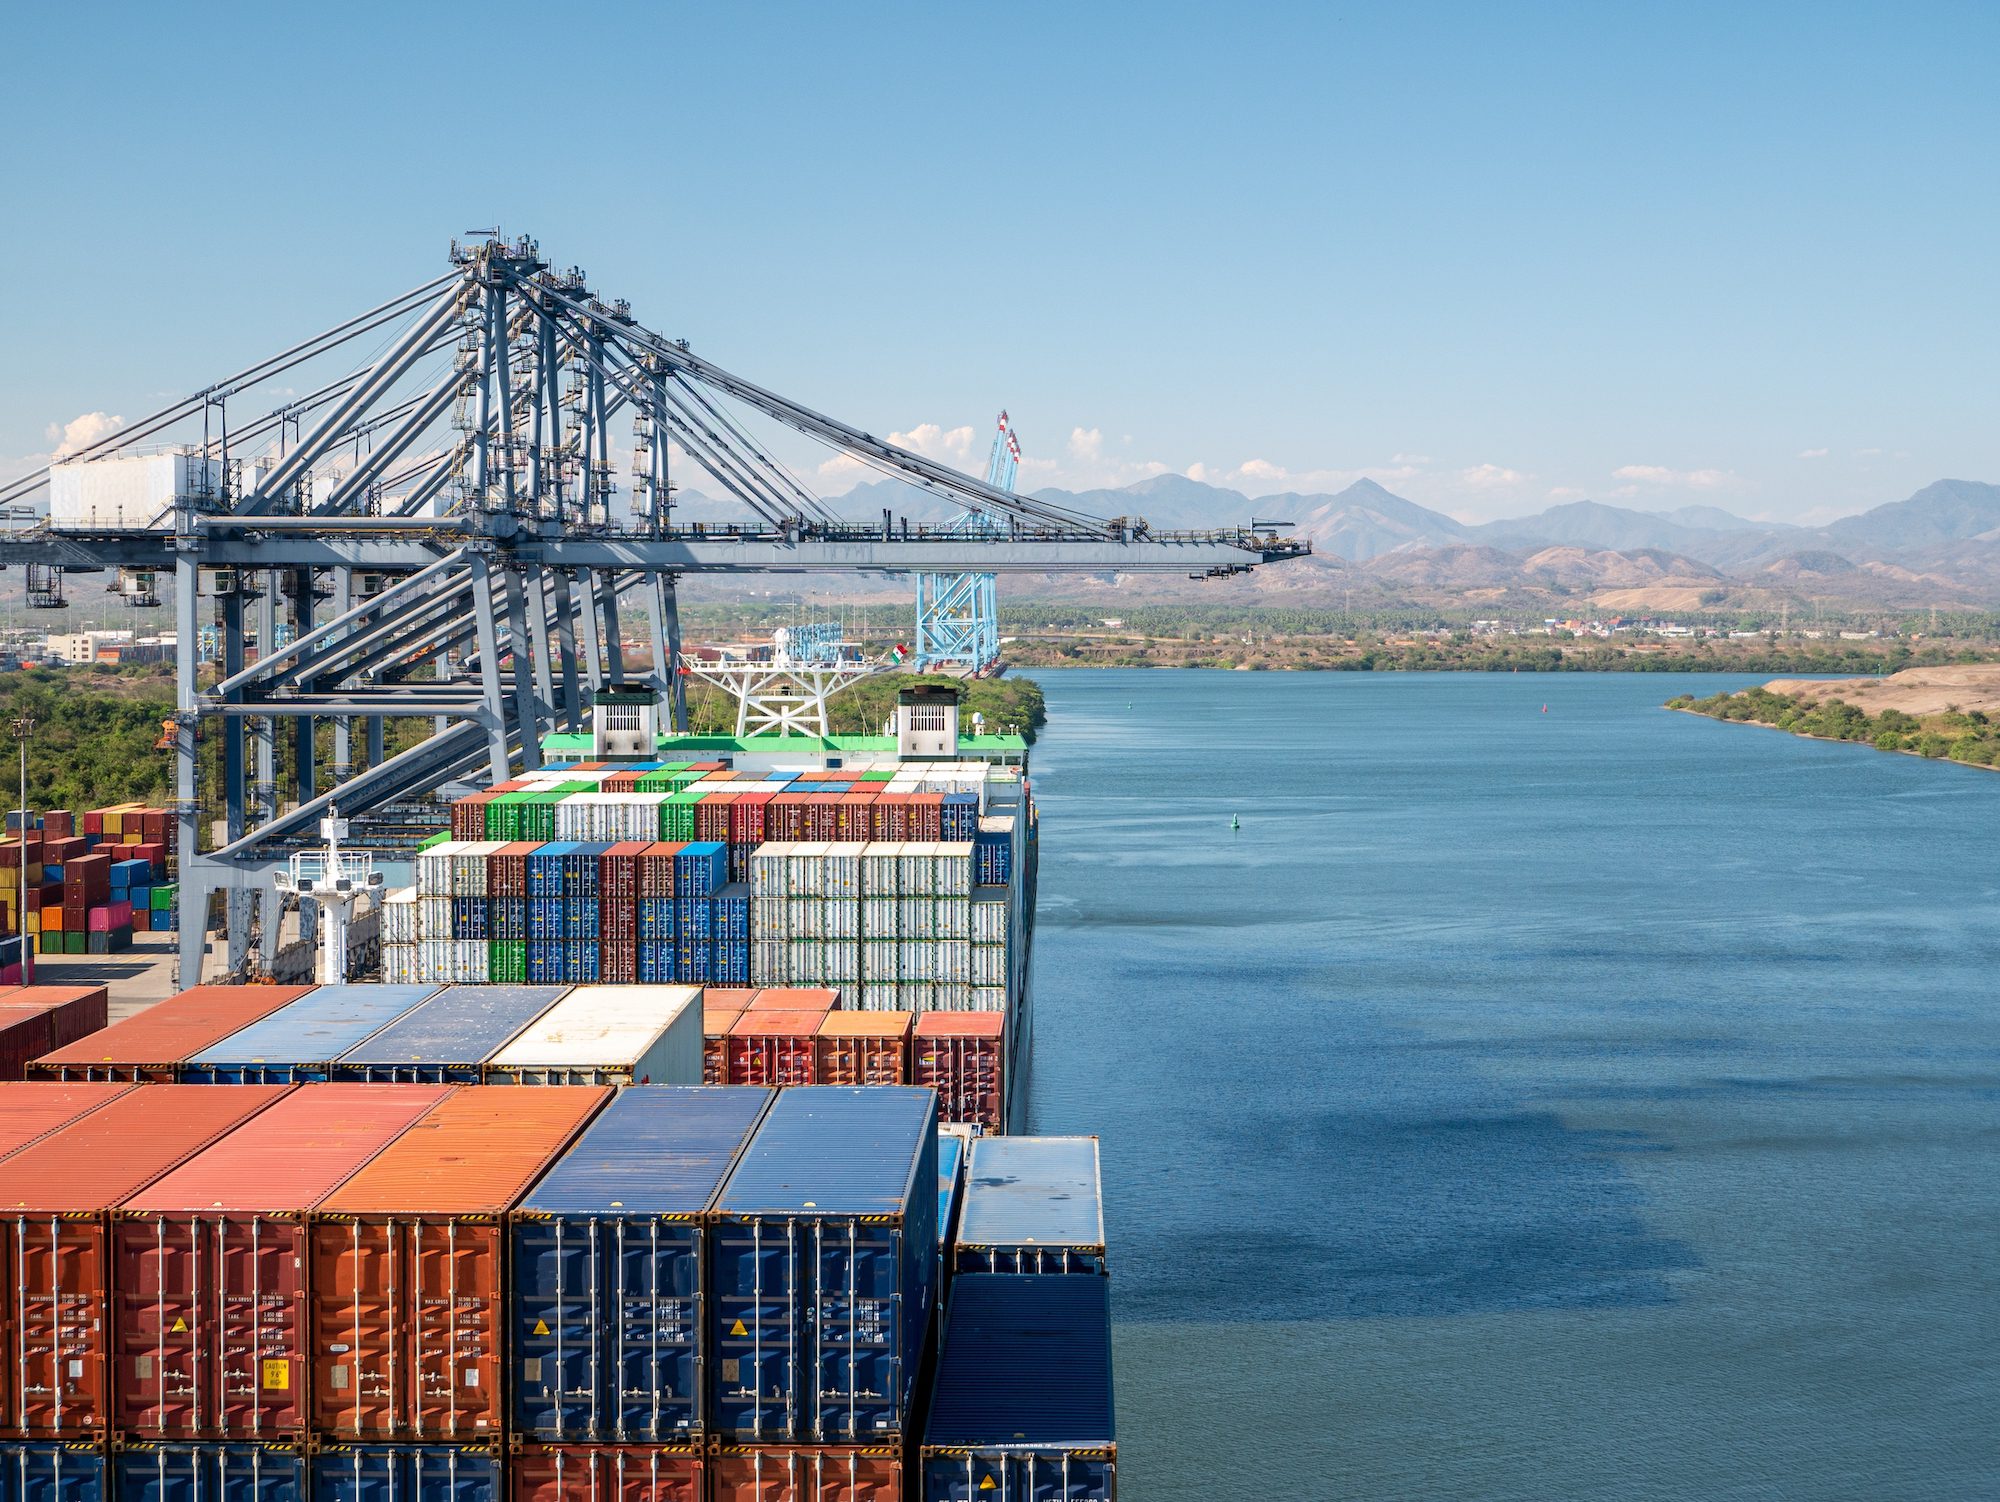 File photo shows Mexico's Port of Lazaro Cardenas from the bridge of a containership at berth